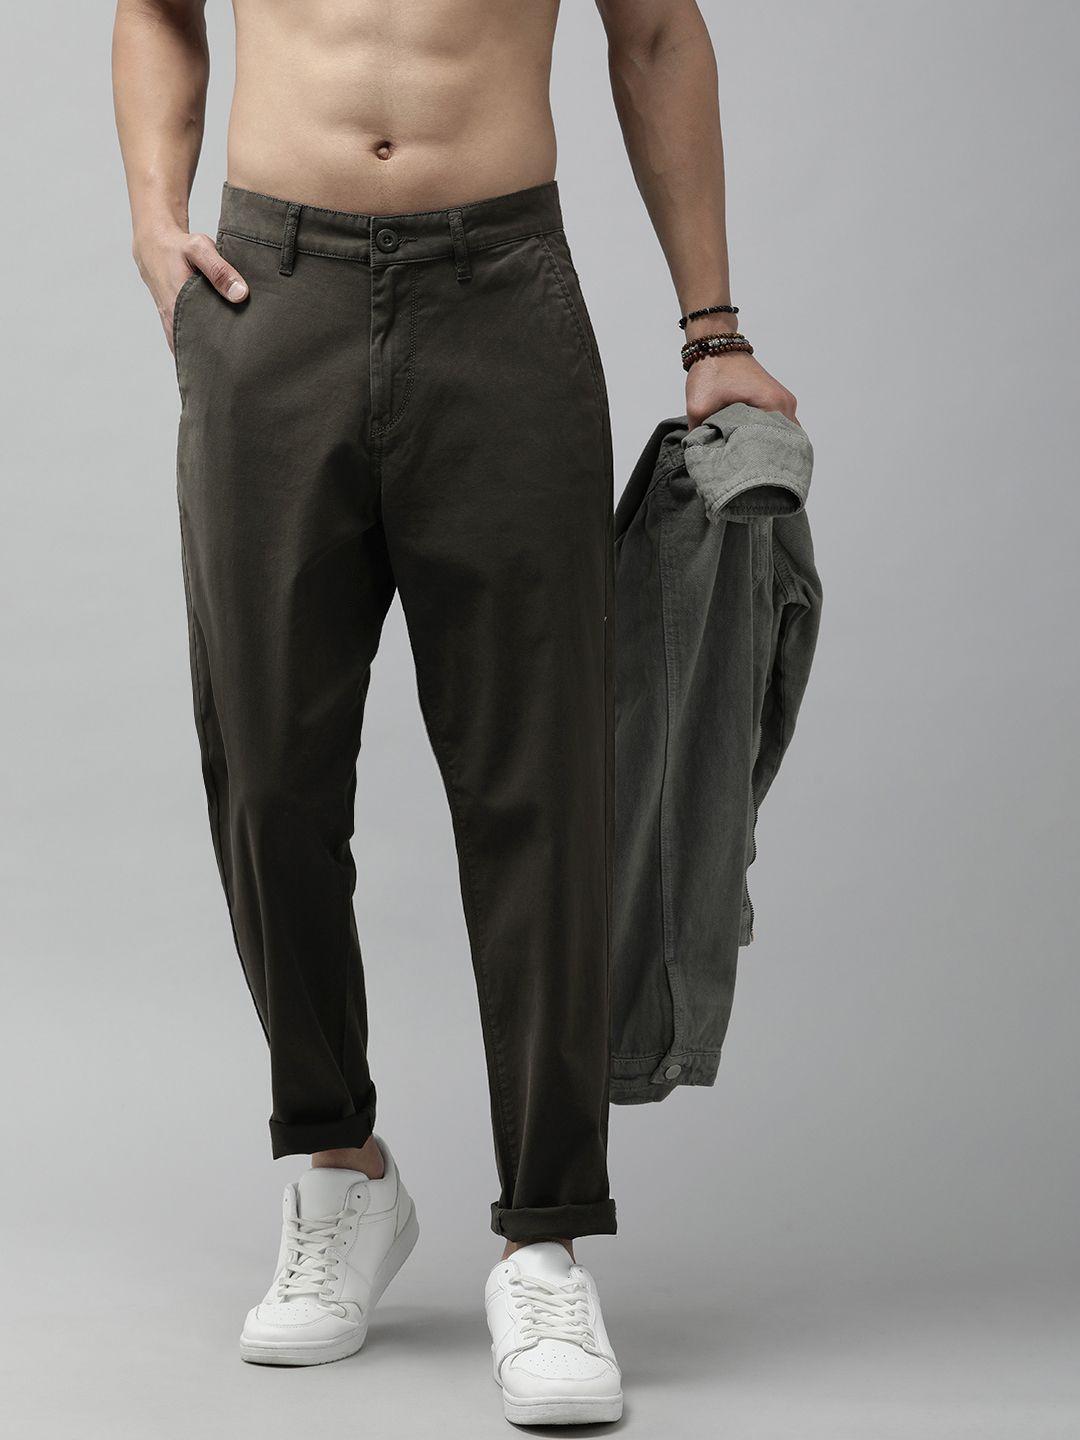 the roadster life co. men relaxed fit chinos